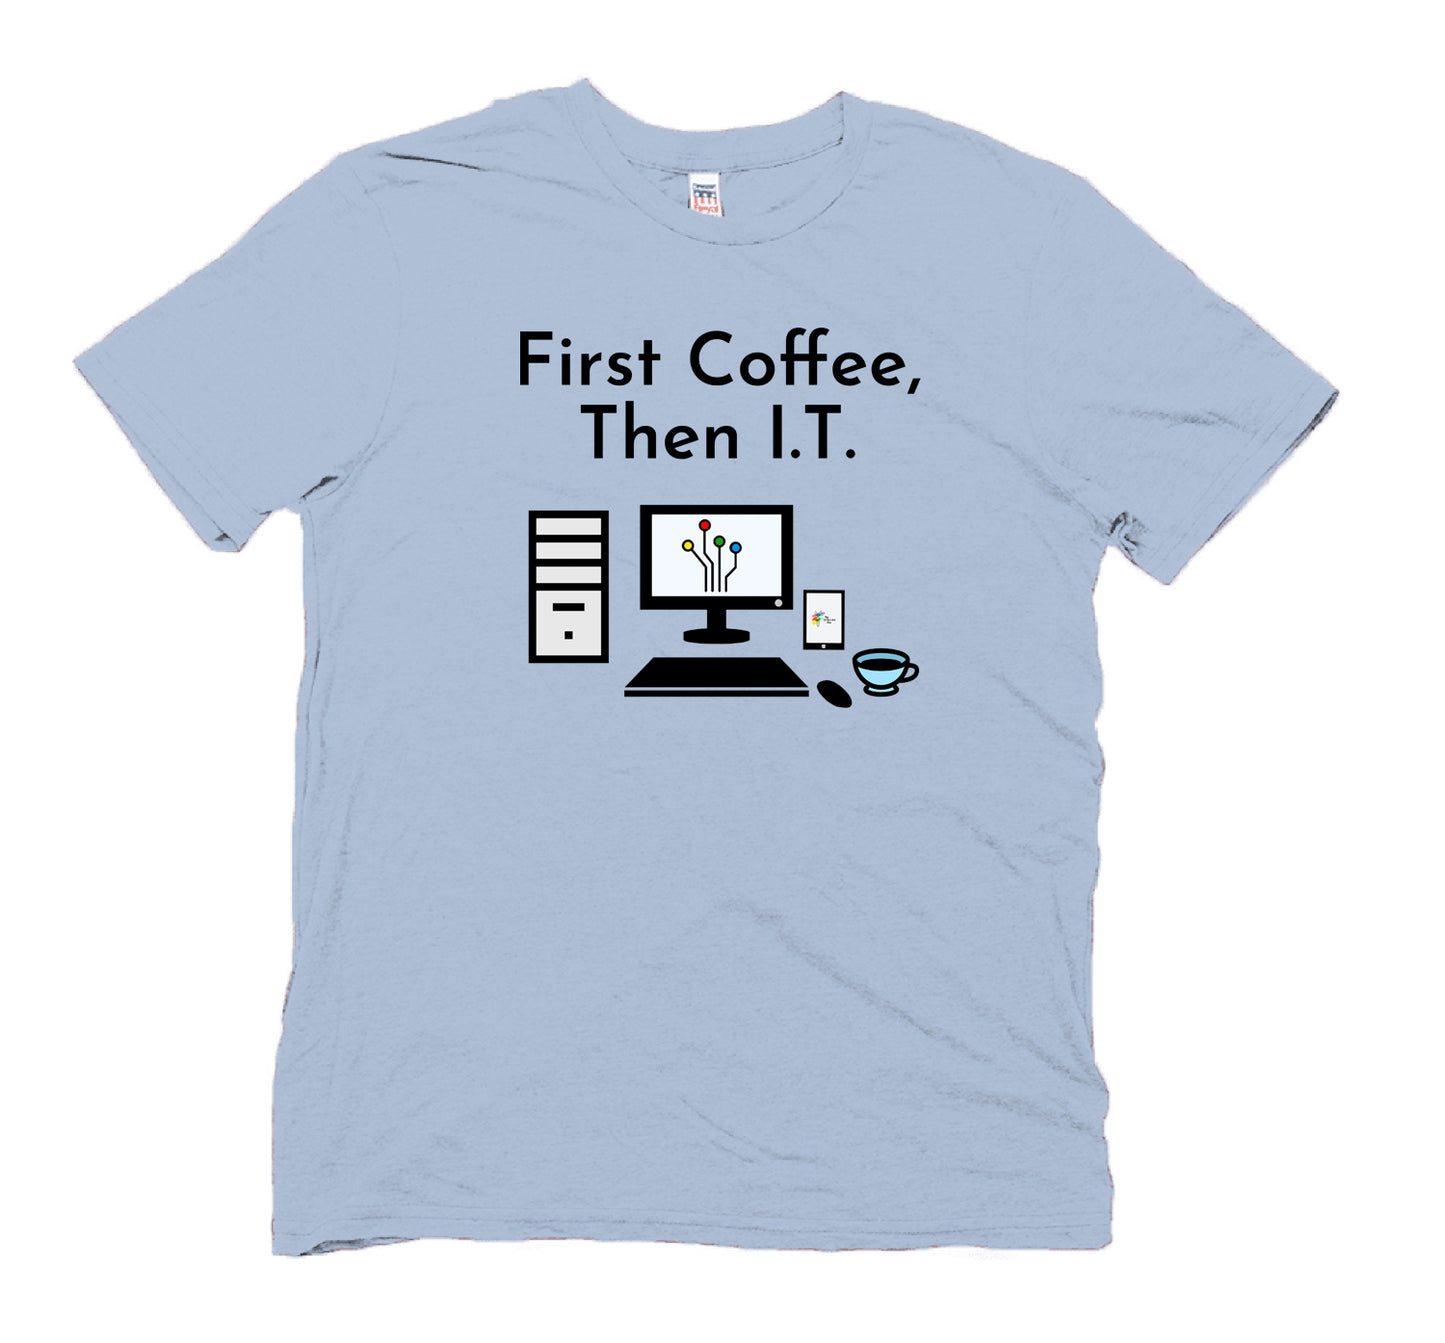 Information Technology T Shirt First Coffee Then I.T. by The Office Art Guy, heaven blue color